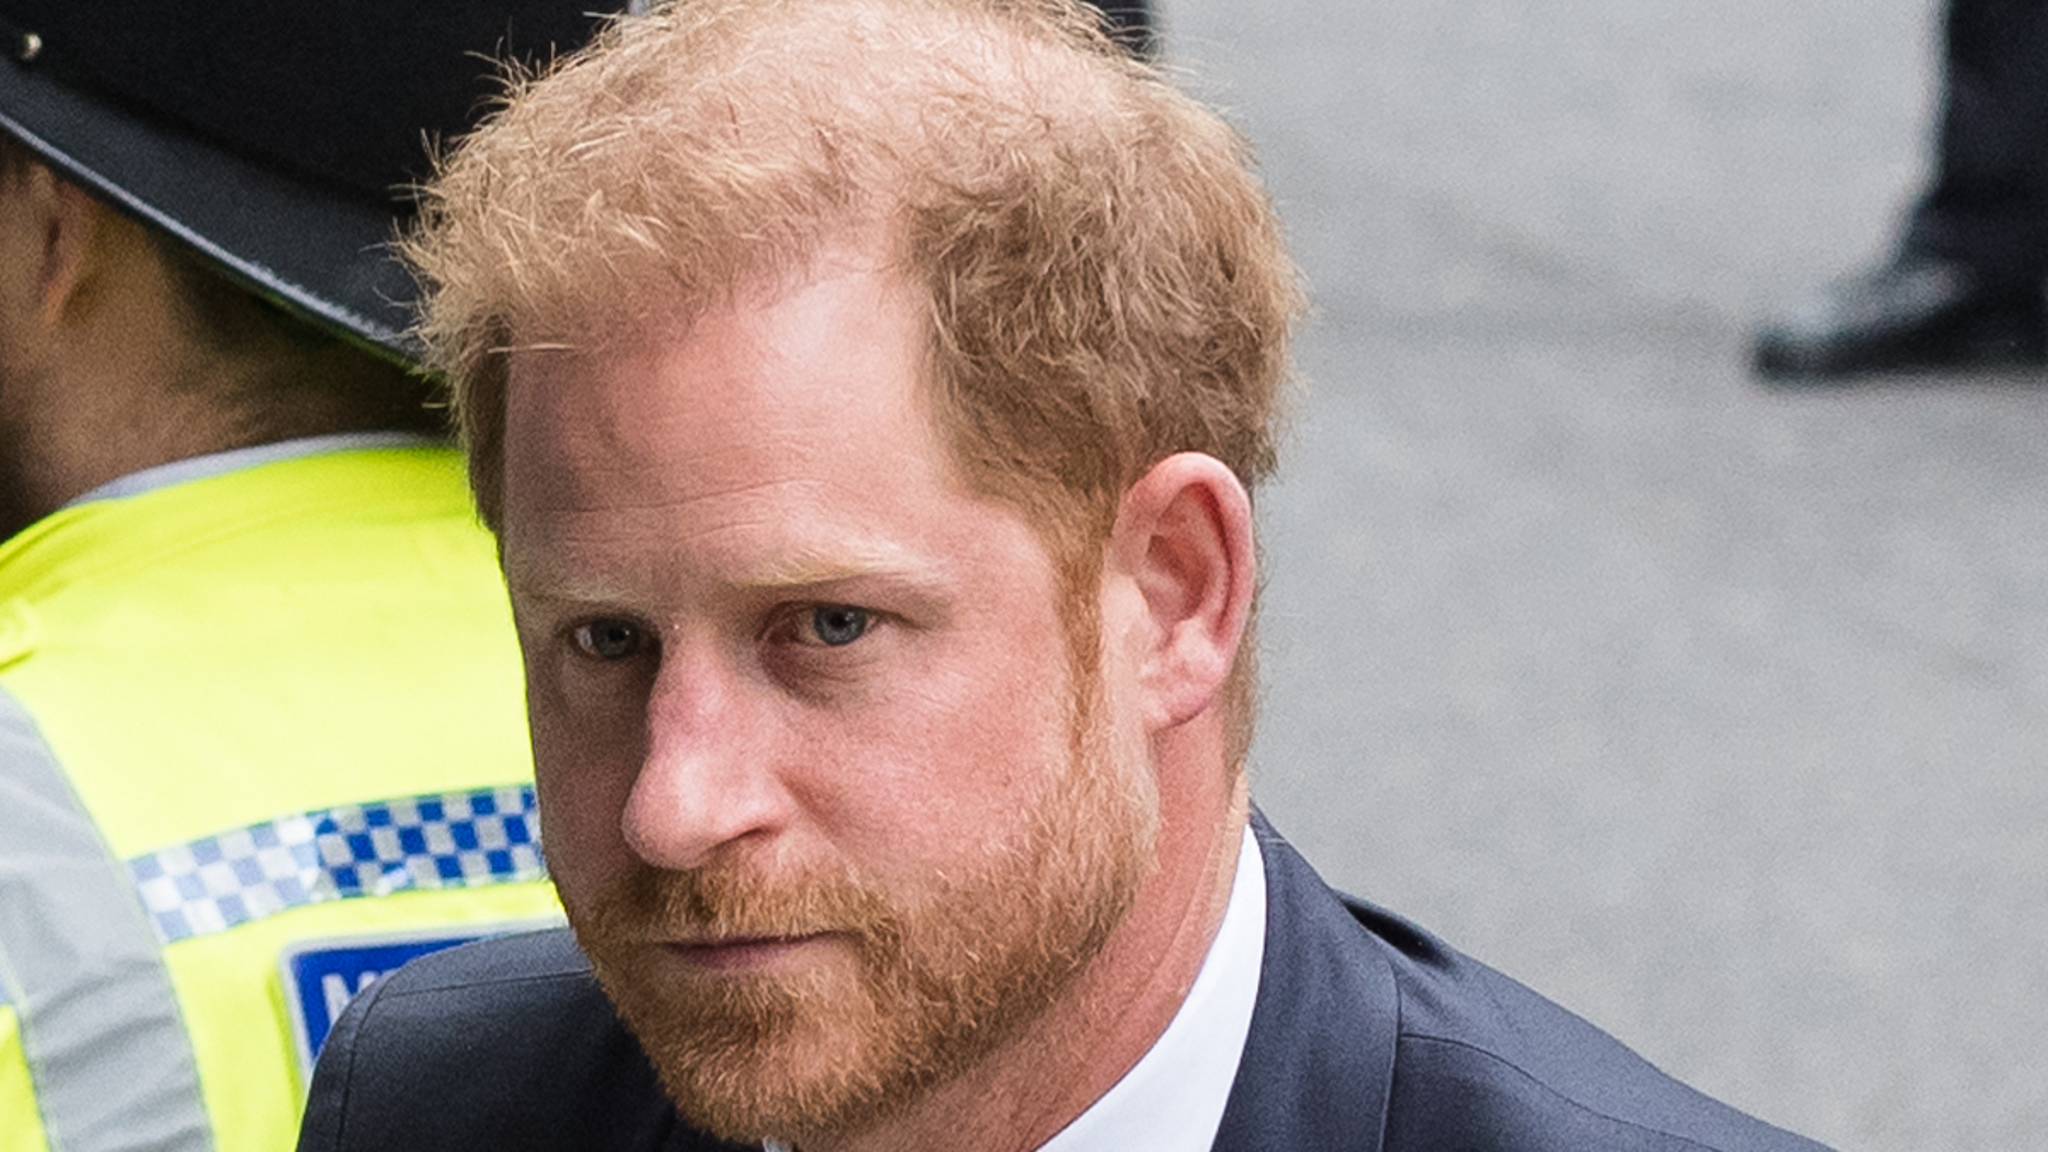 Prince Harry’s hacking claims hearing on second day of testimony